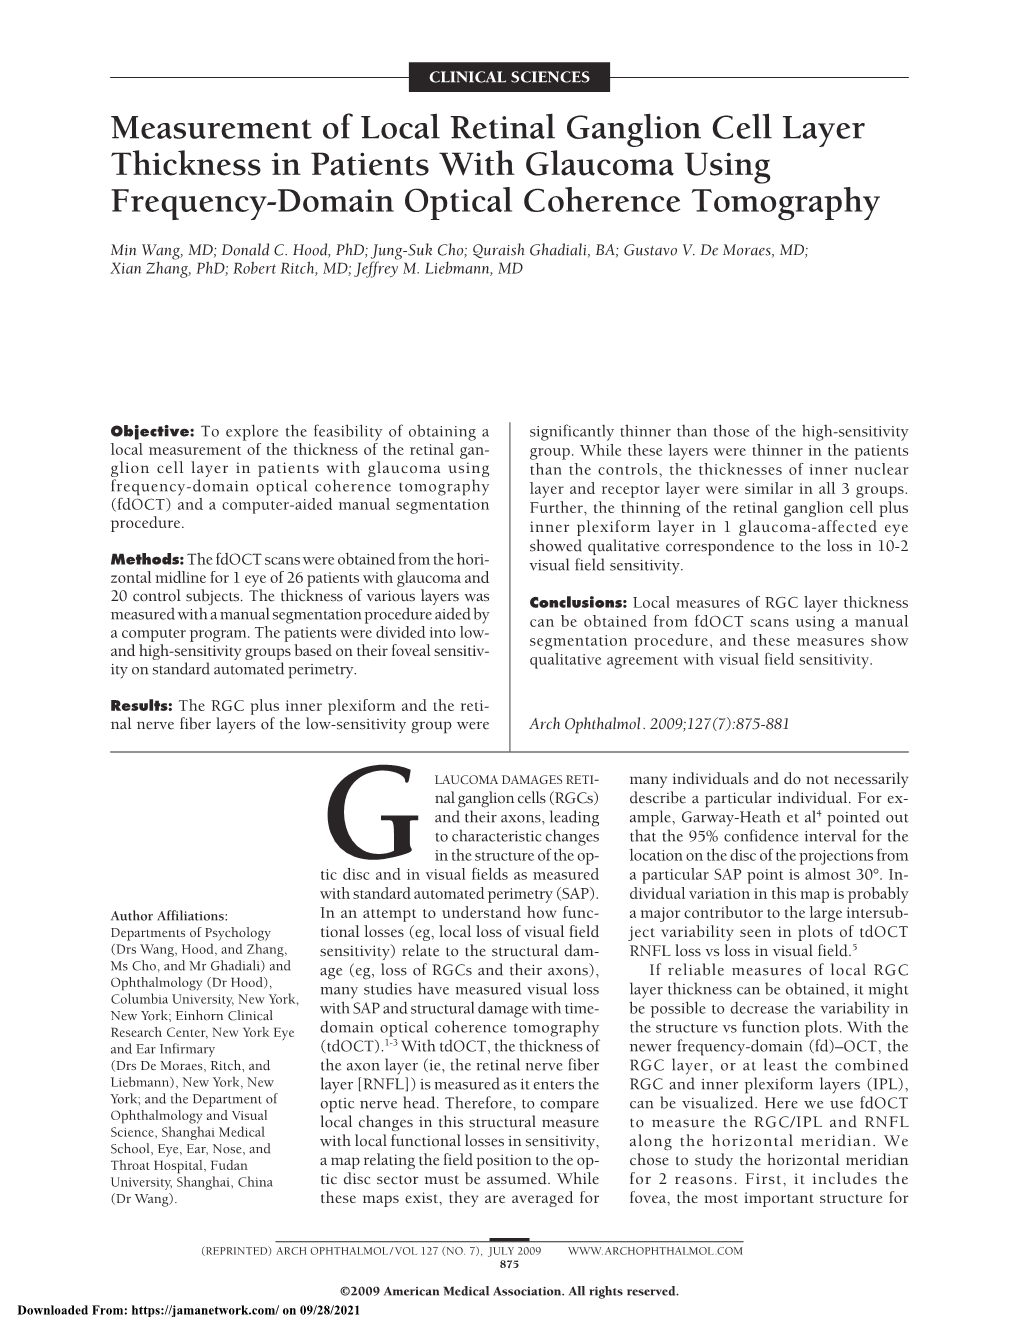 Measurement of Local Retinal Ganglion Cell Layer Thickness in Patients with Glaucoma Using Frequency-Domain Optical Coherence Tomography